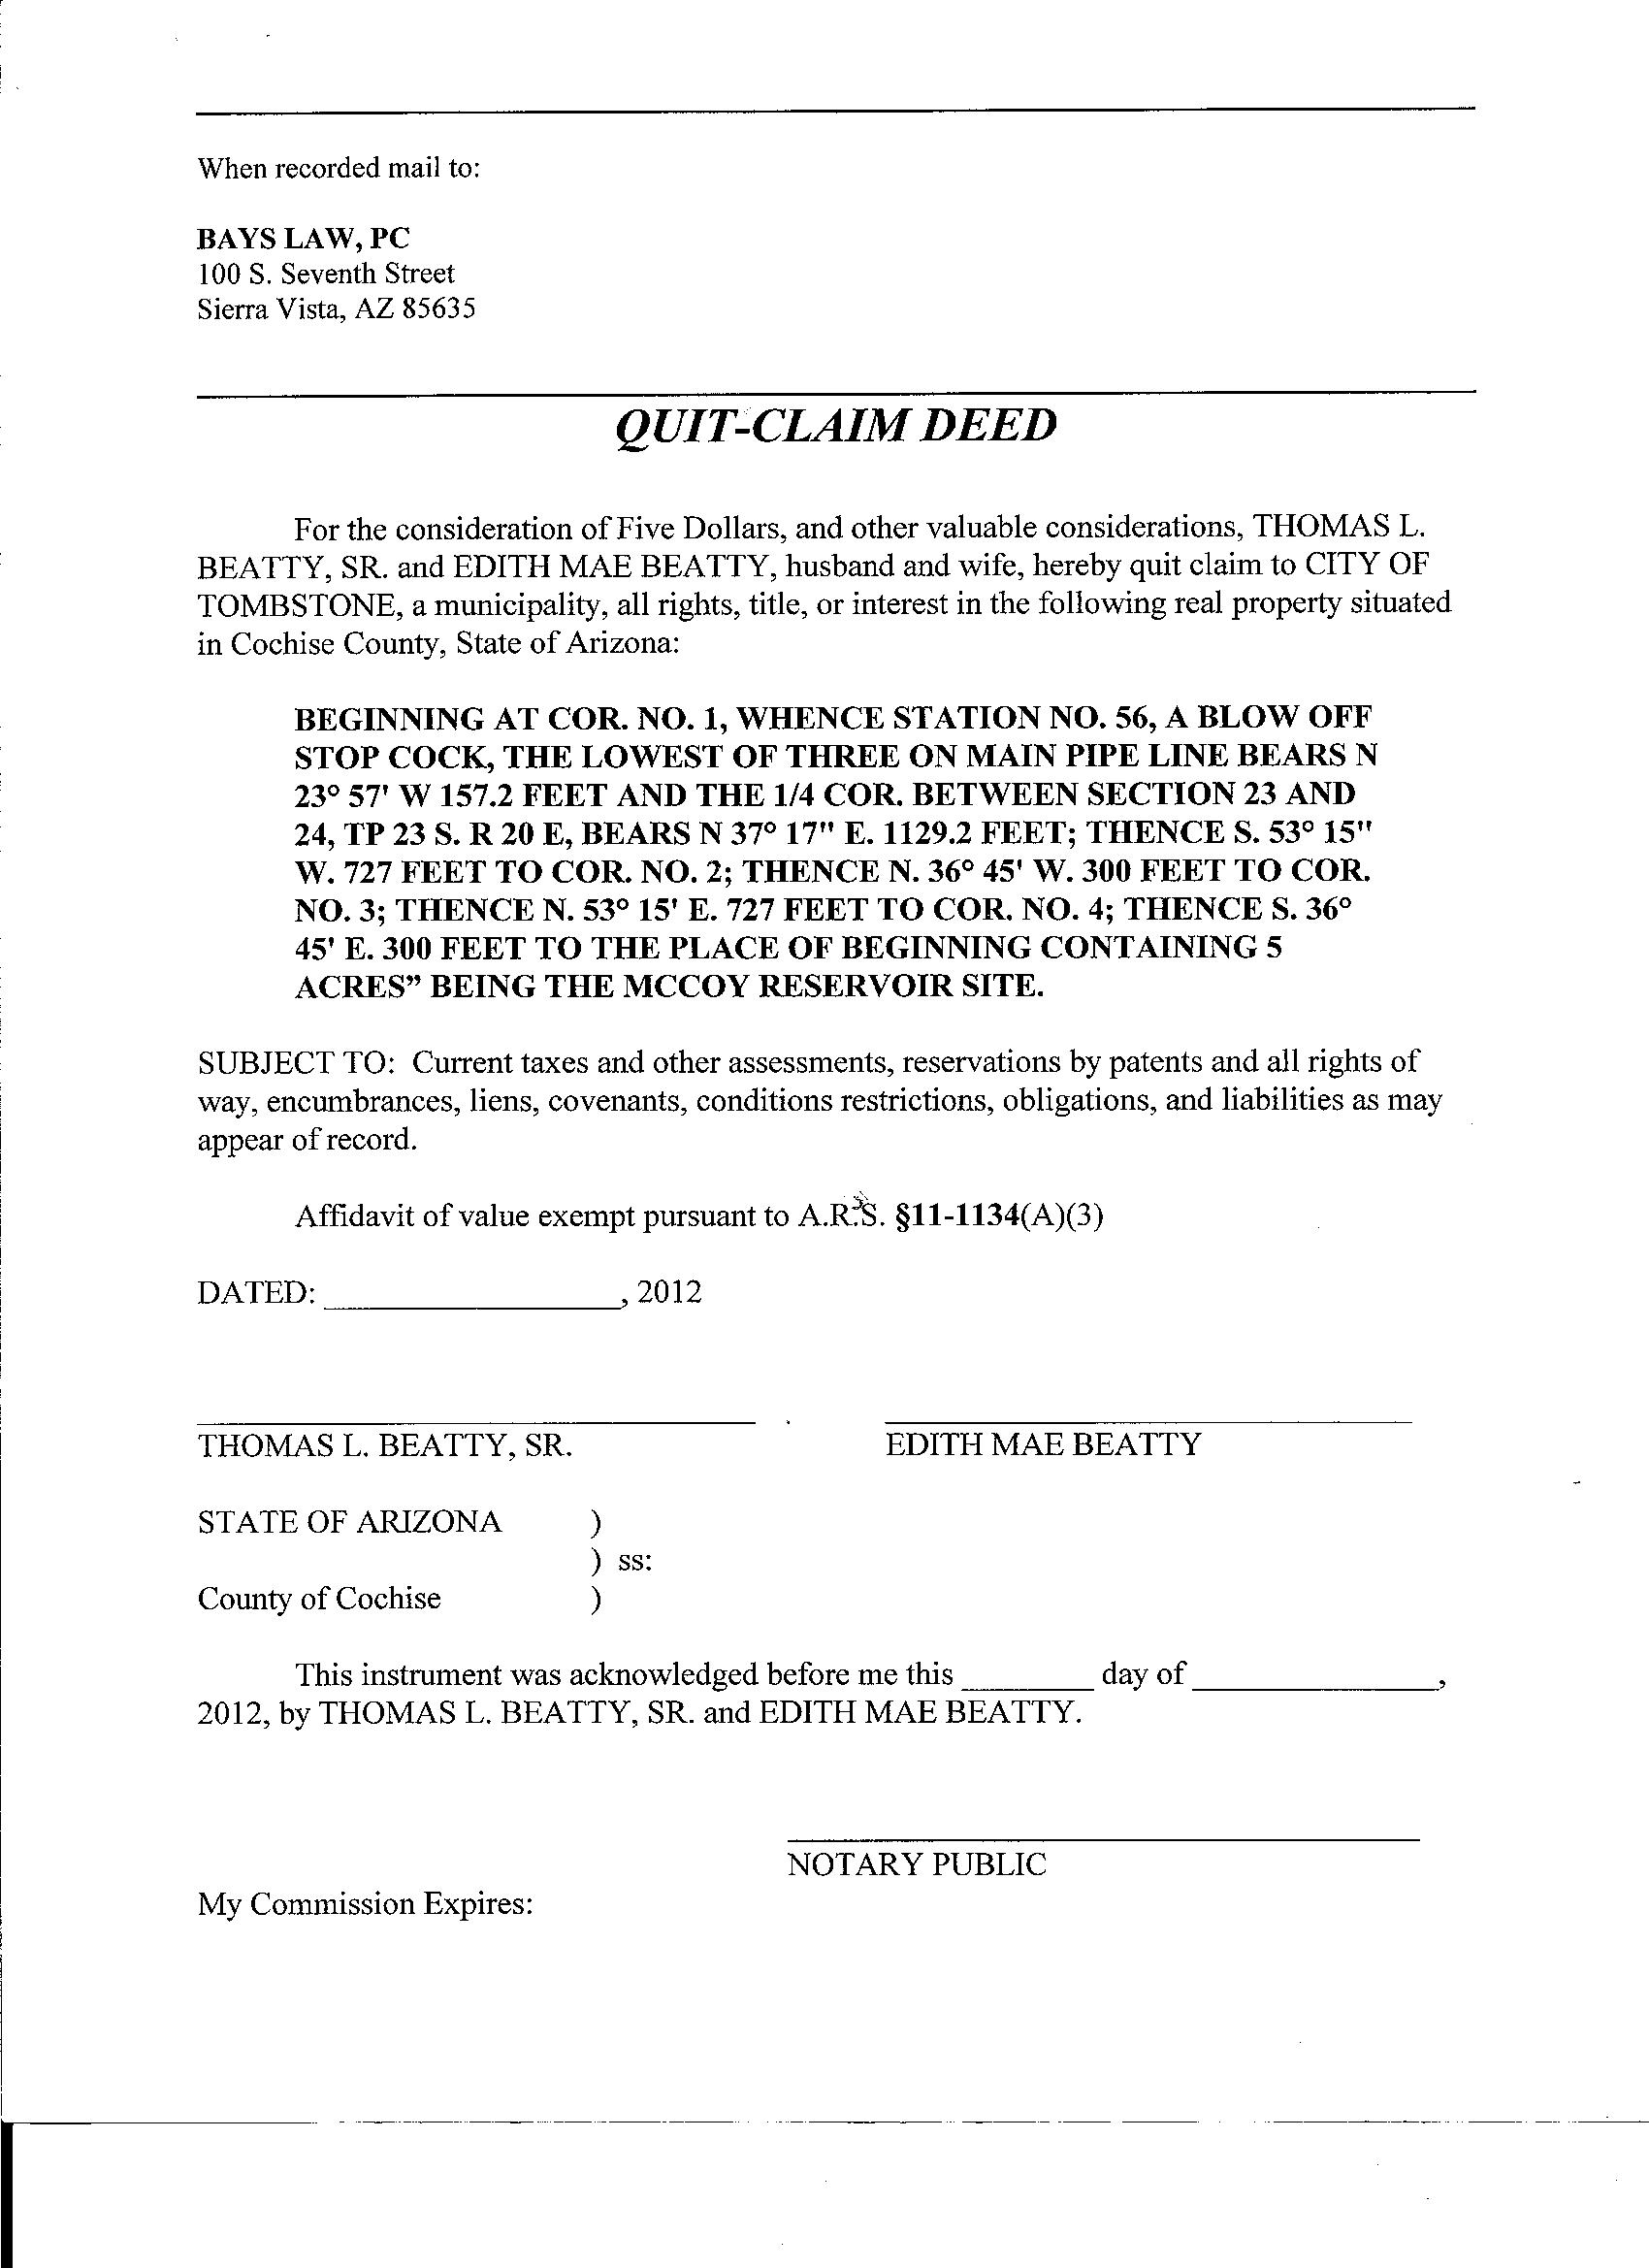 Quit Claim Deed Sample Form Free Printable Documents